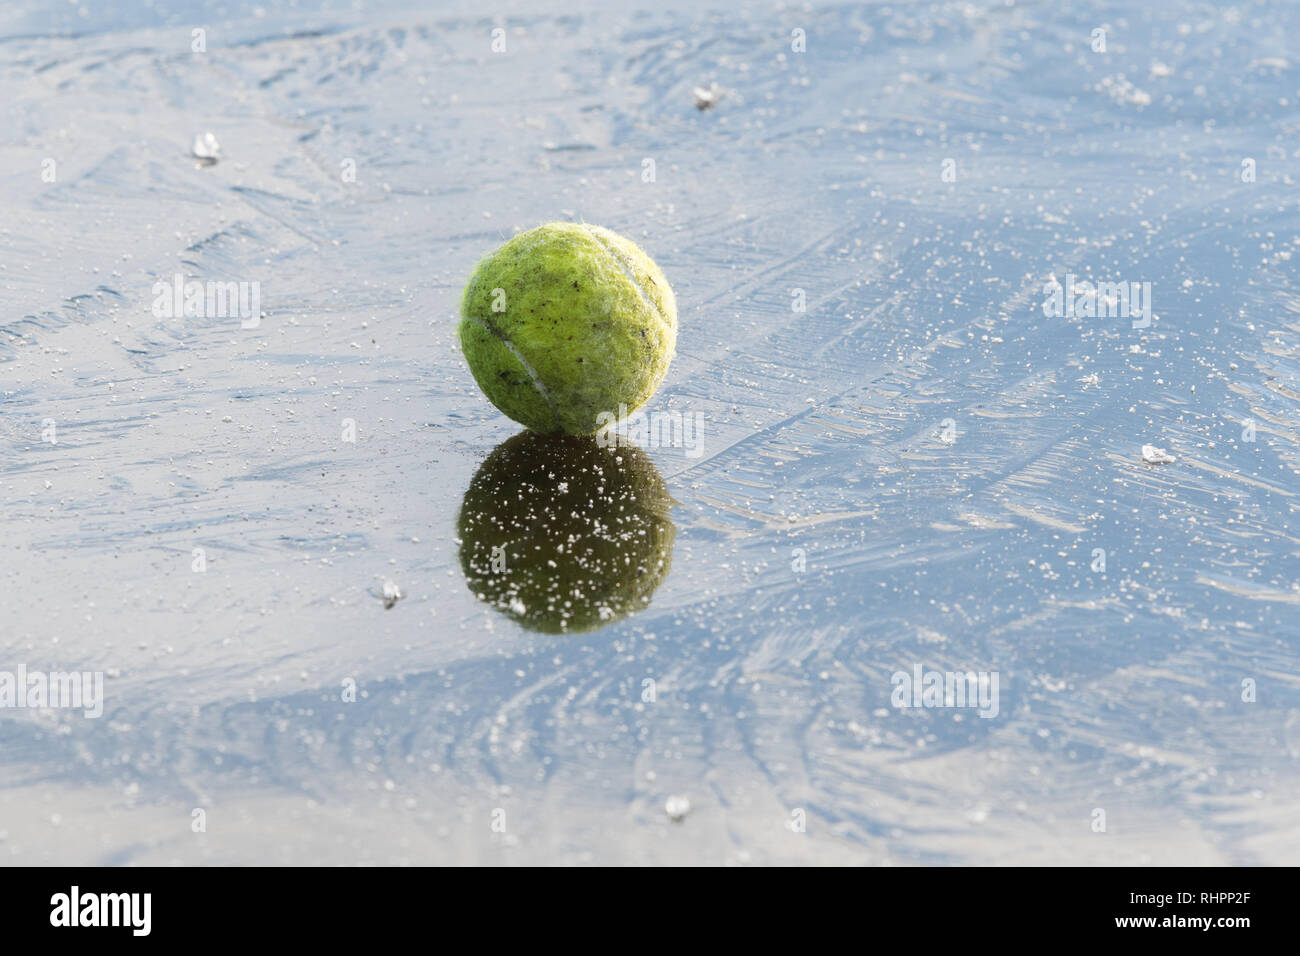 https://c8.alamy.com/comp/RHPP2F/ball-on-ice-dogs-tennis-ball-on-frozen-pond-to-illustrate-the-dangers-of-dogs-running-onto-frozen-water-RHPP2F.jpg